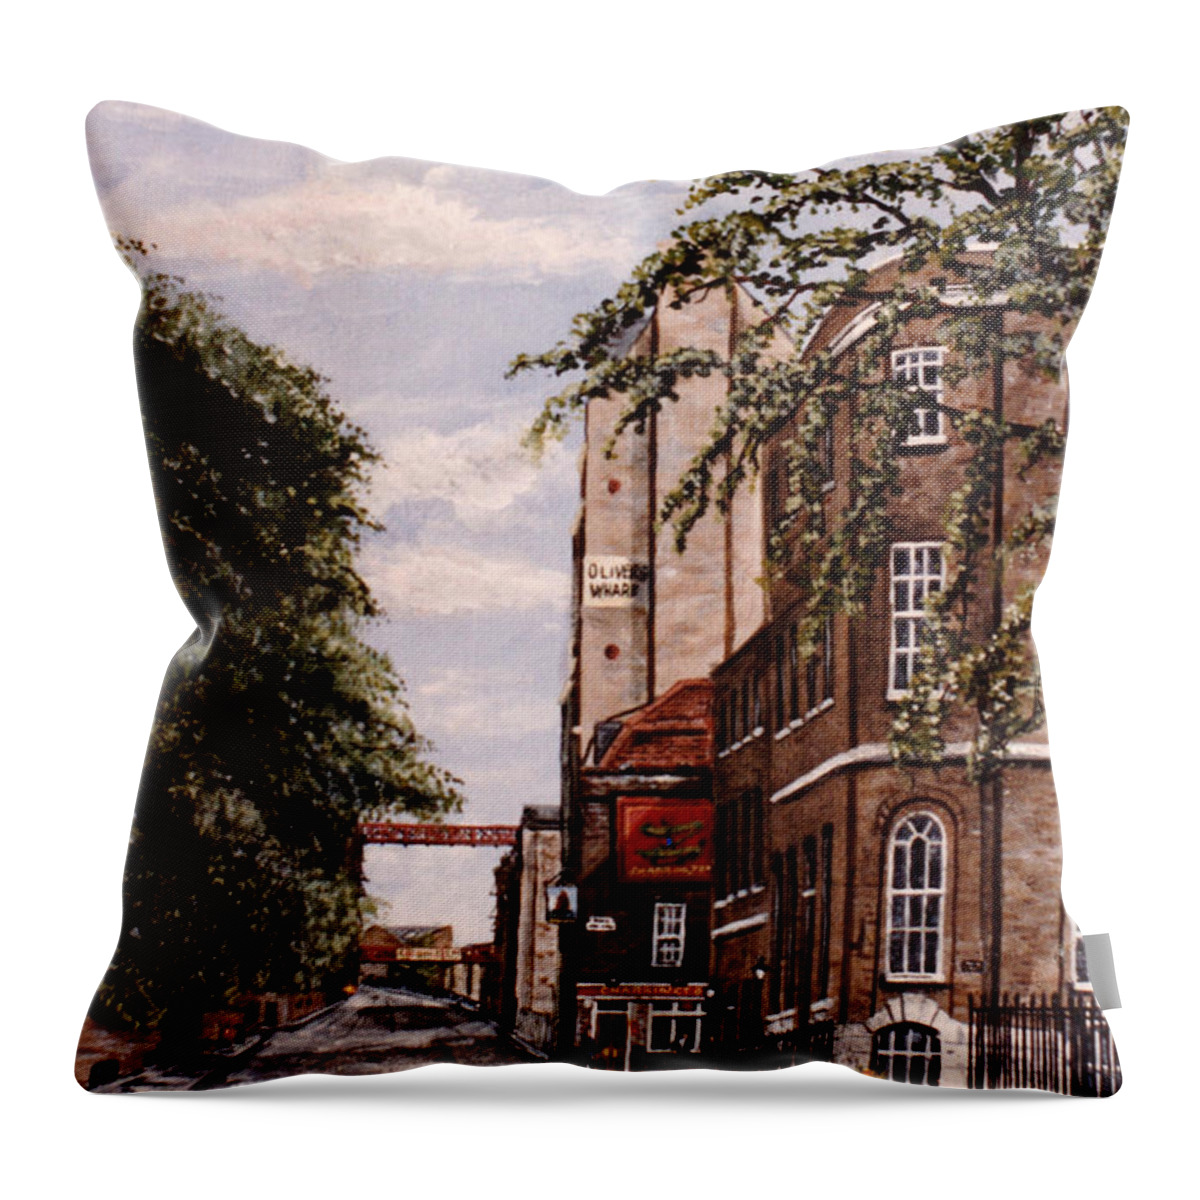 Wapping Throw Pillow featuring the painting Wapping High Street and The Town of Ramsgate by Mackenzie Moulton